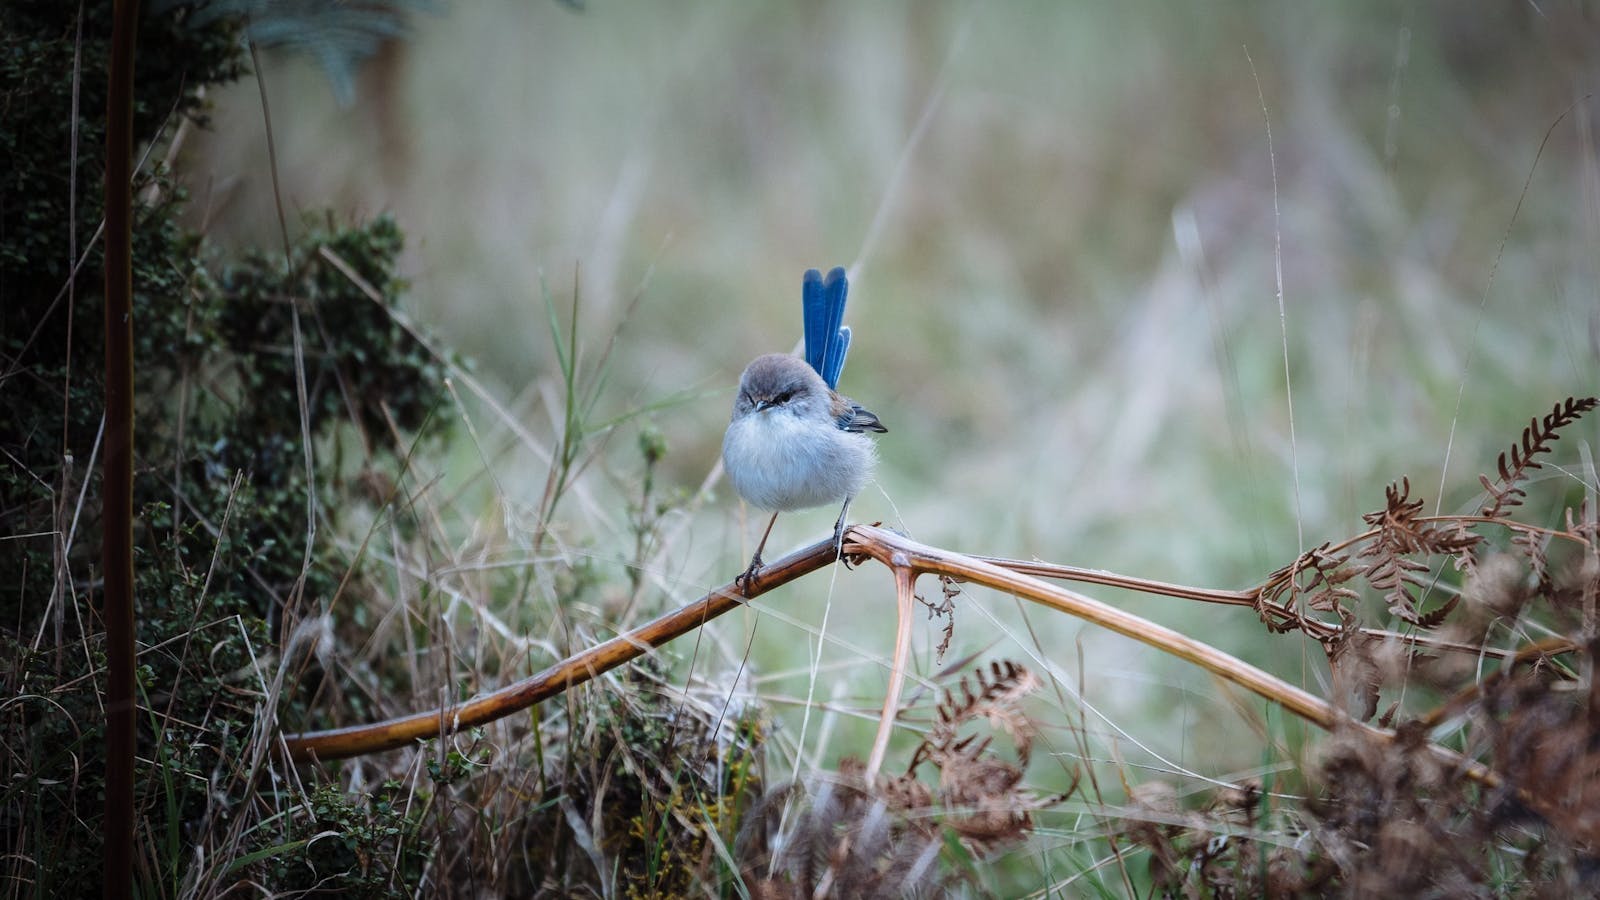 A Superb Blue Fairy Wren spotted at Liffey River Reserve